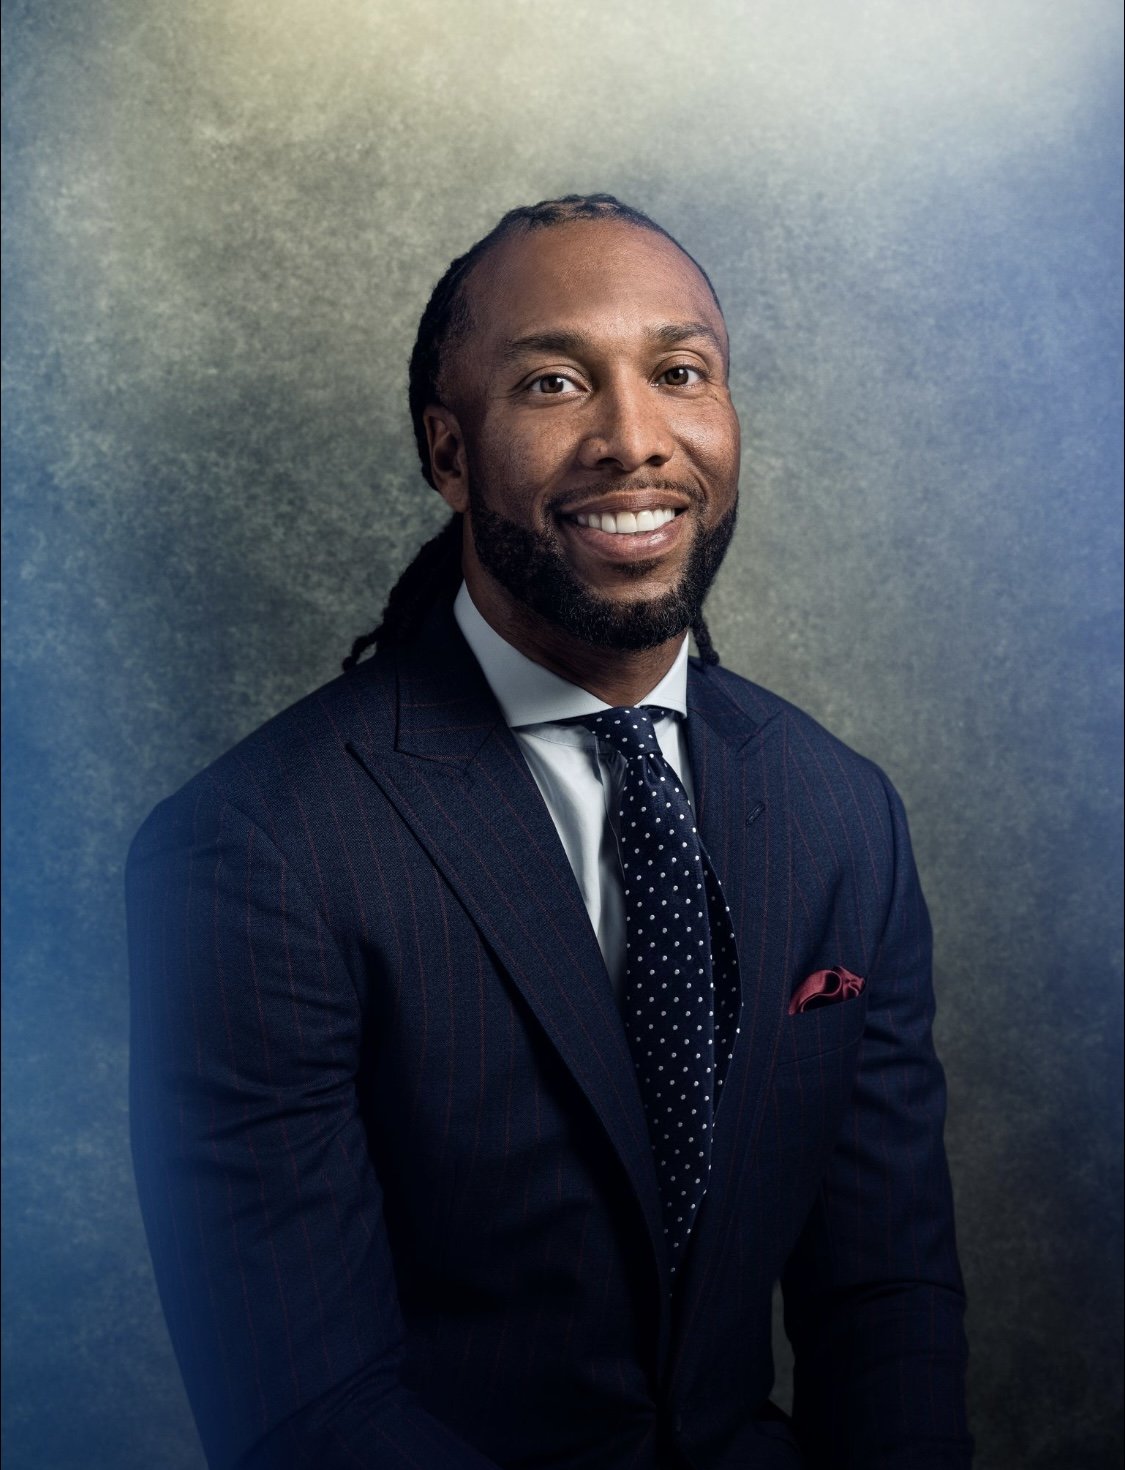 ElevateMeD Awards 2023 Trailblazer Award to Larry Fitzgerald, Jr. of The Larry  Fitzgerald Foundation and Breast Believe Campaign — ElevateMeD